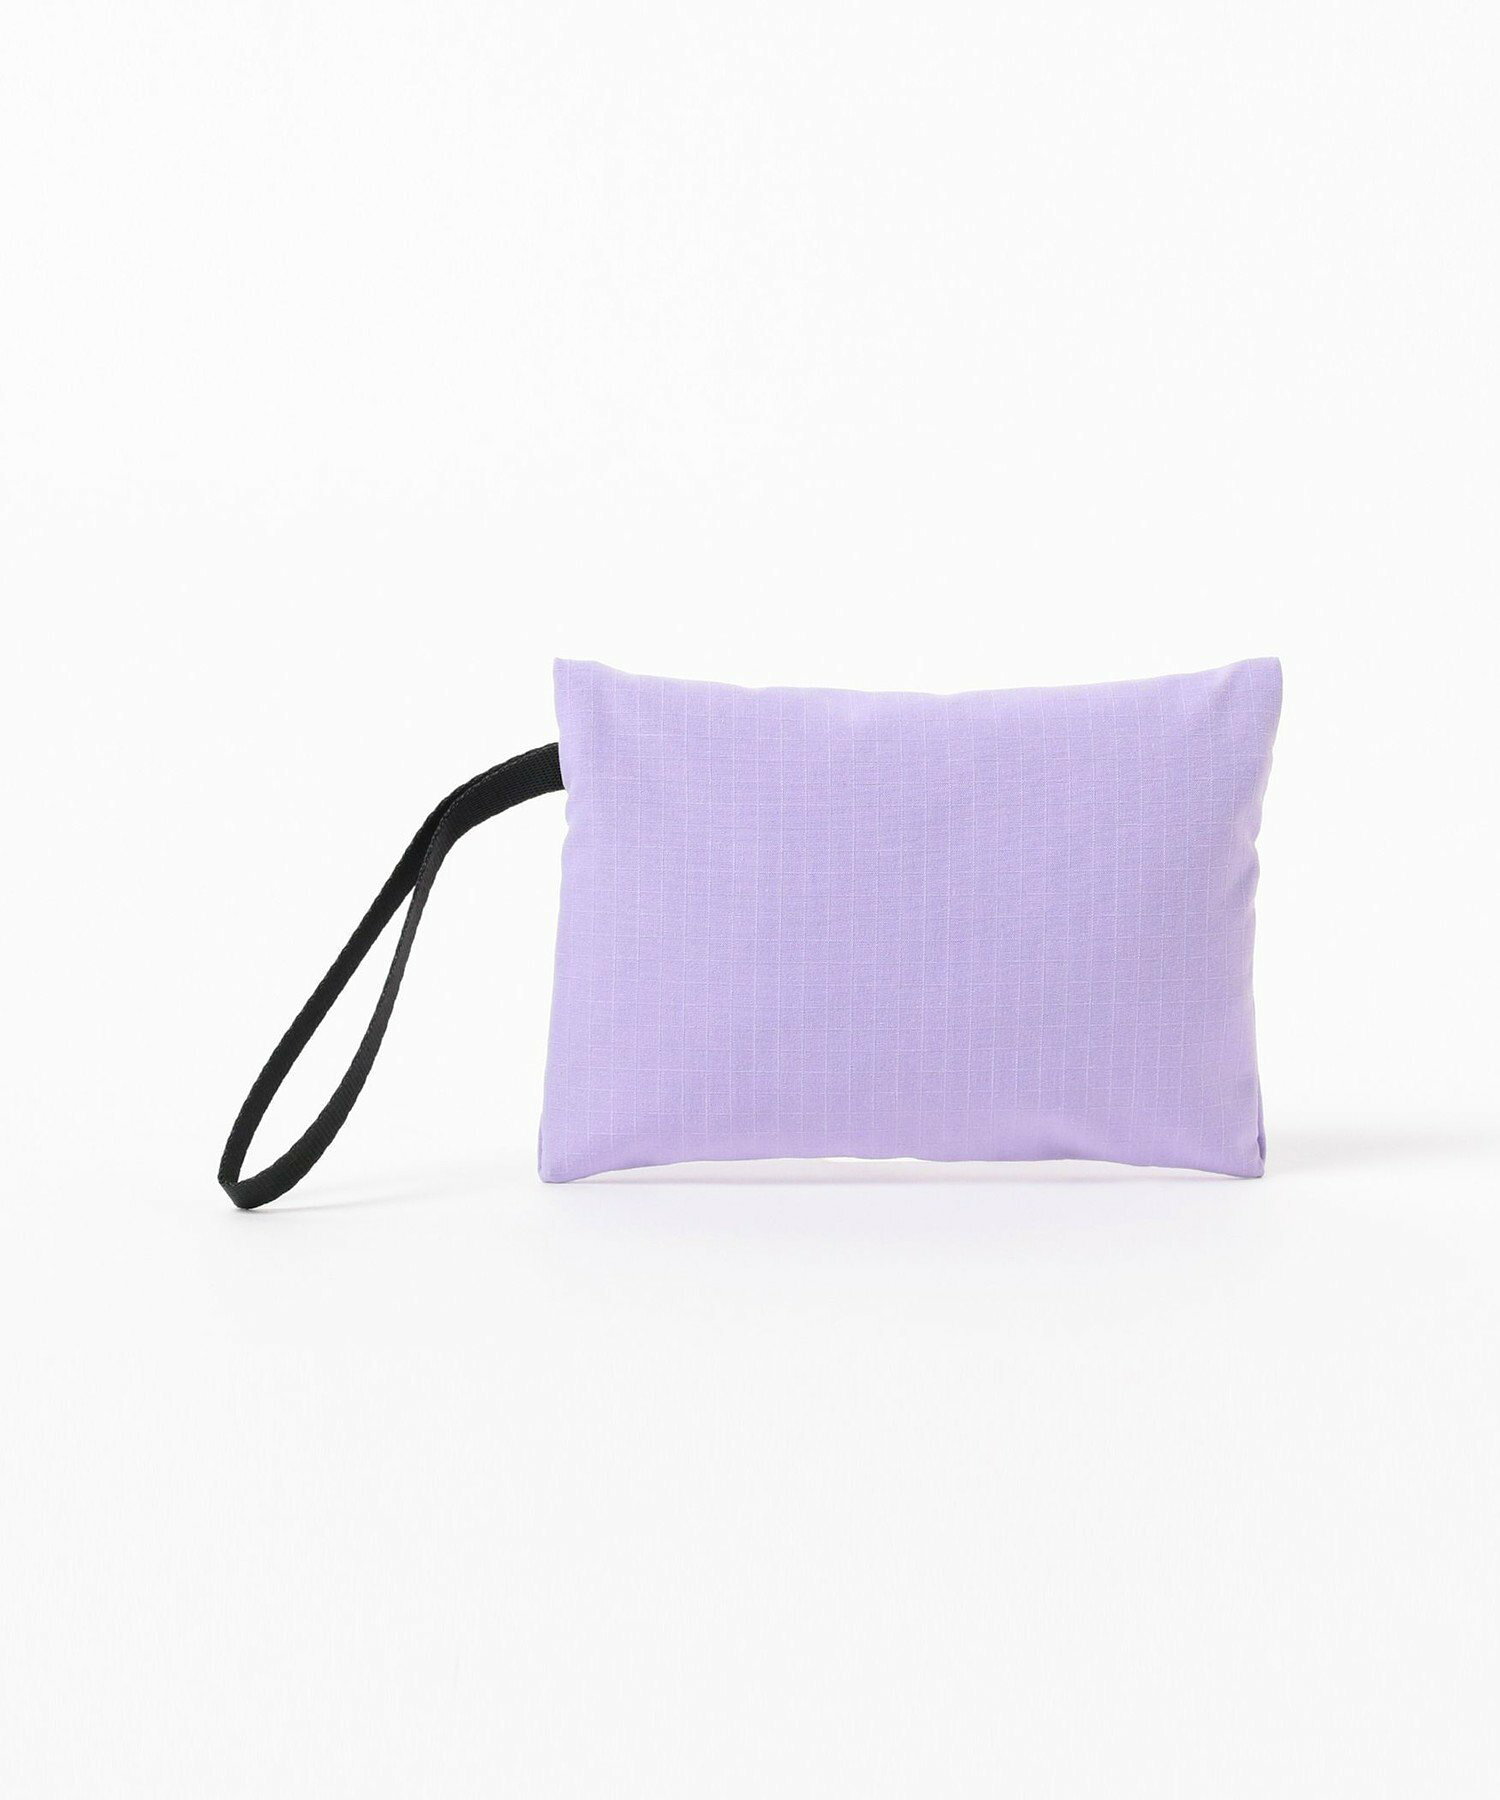 B:MING by BEAMS / RIPSTOP FLAT POUCH S